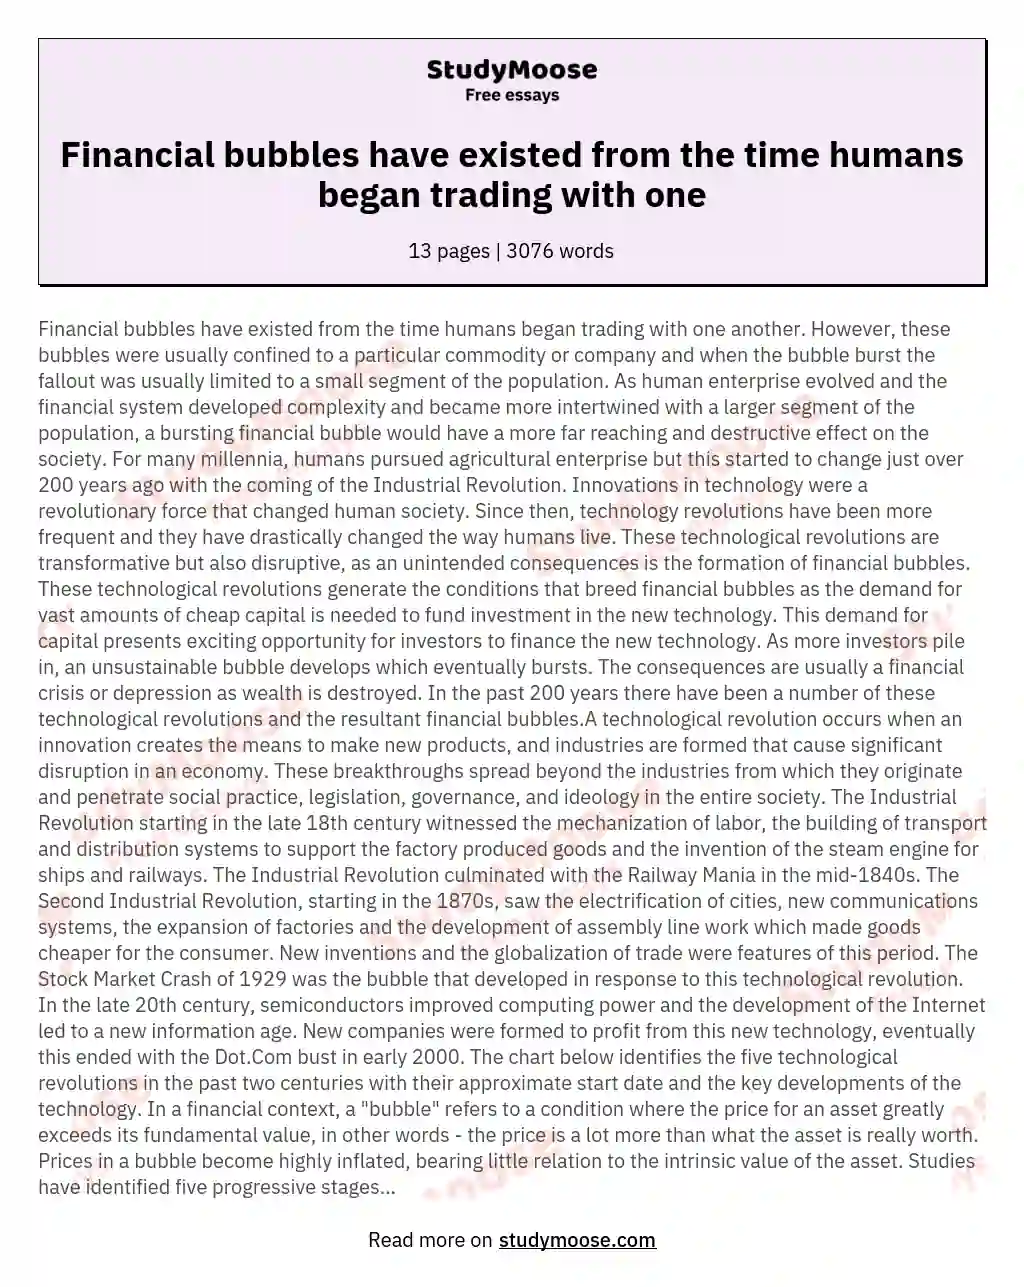 Financial bubbles have existed from the time humans began trading with one